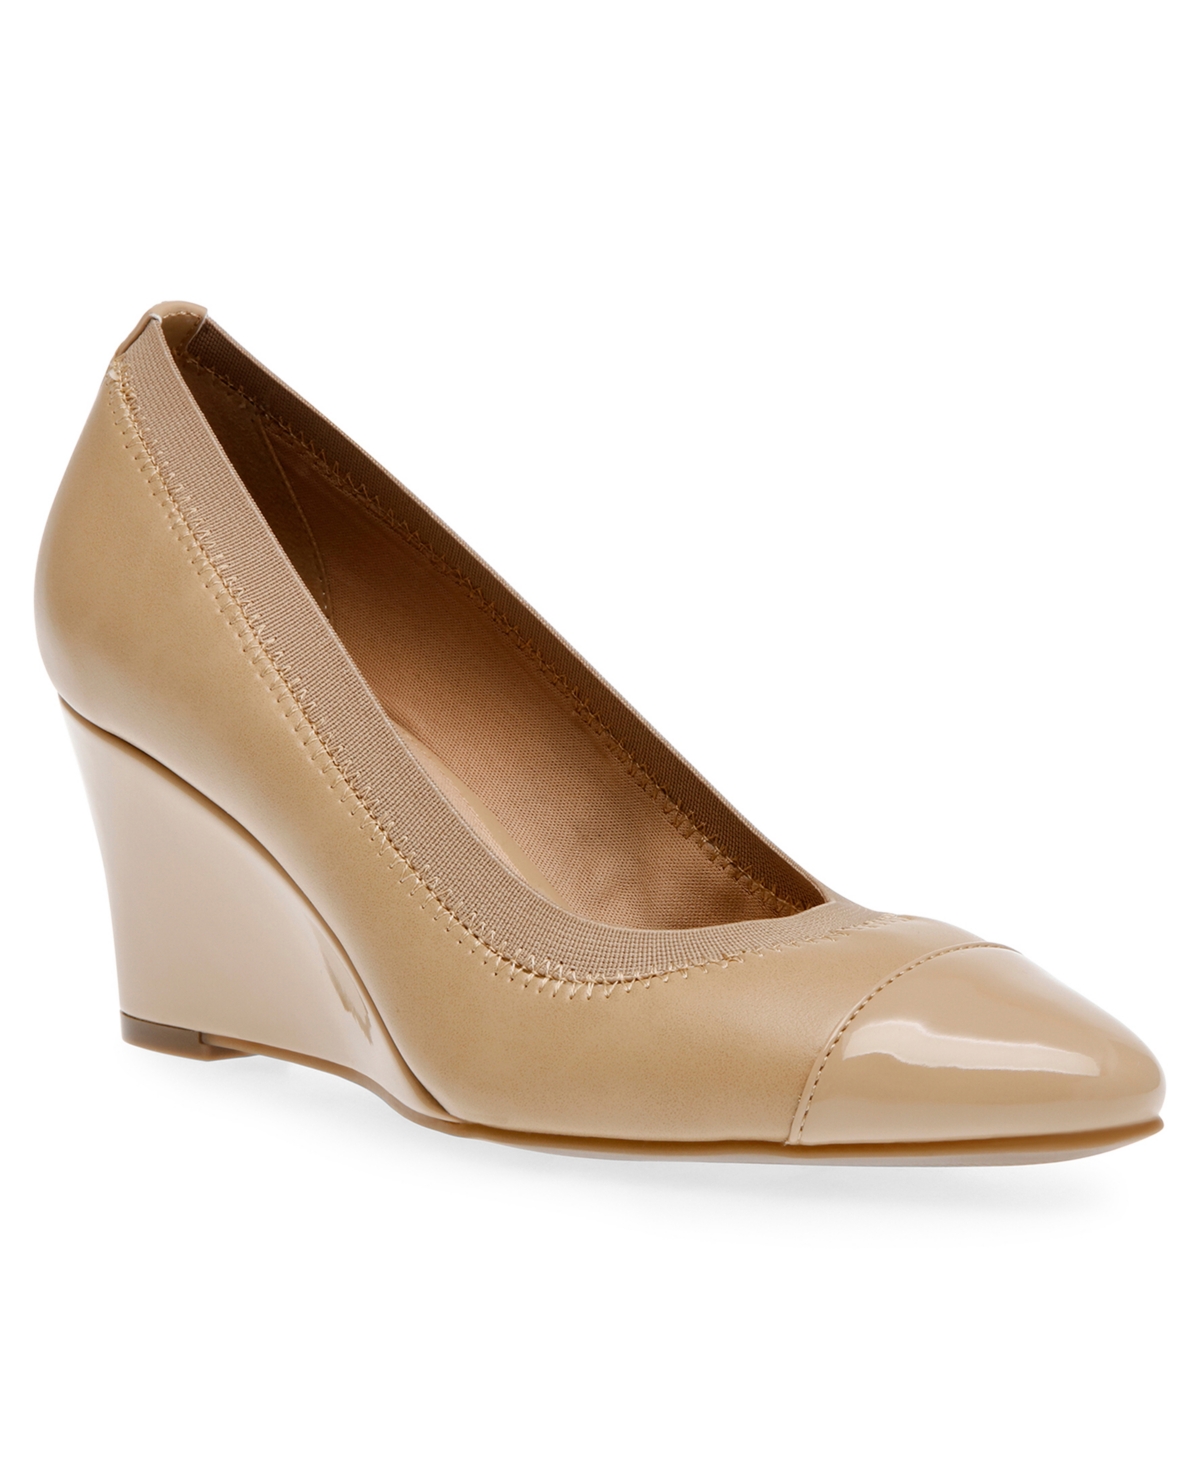 Women's Sindy Pointed Toe Wedge Pumps - Nude Smooth